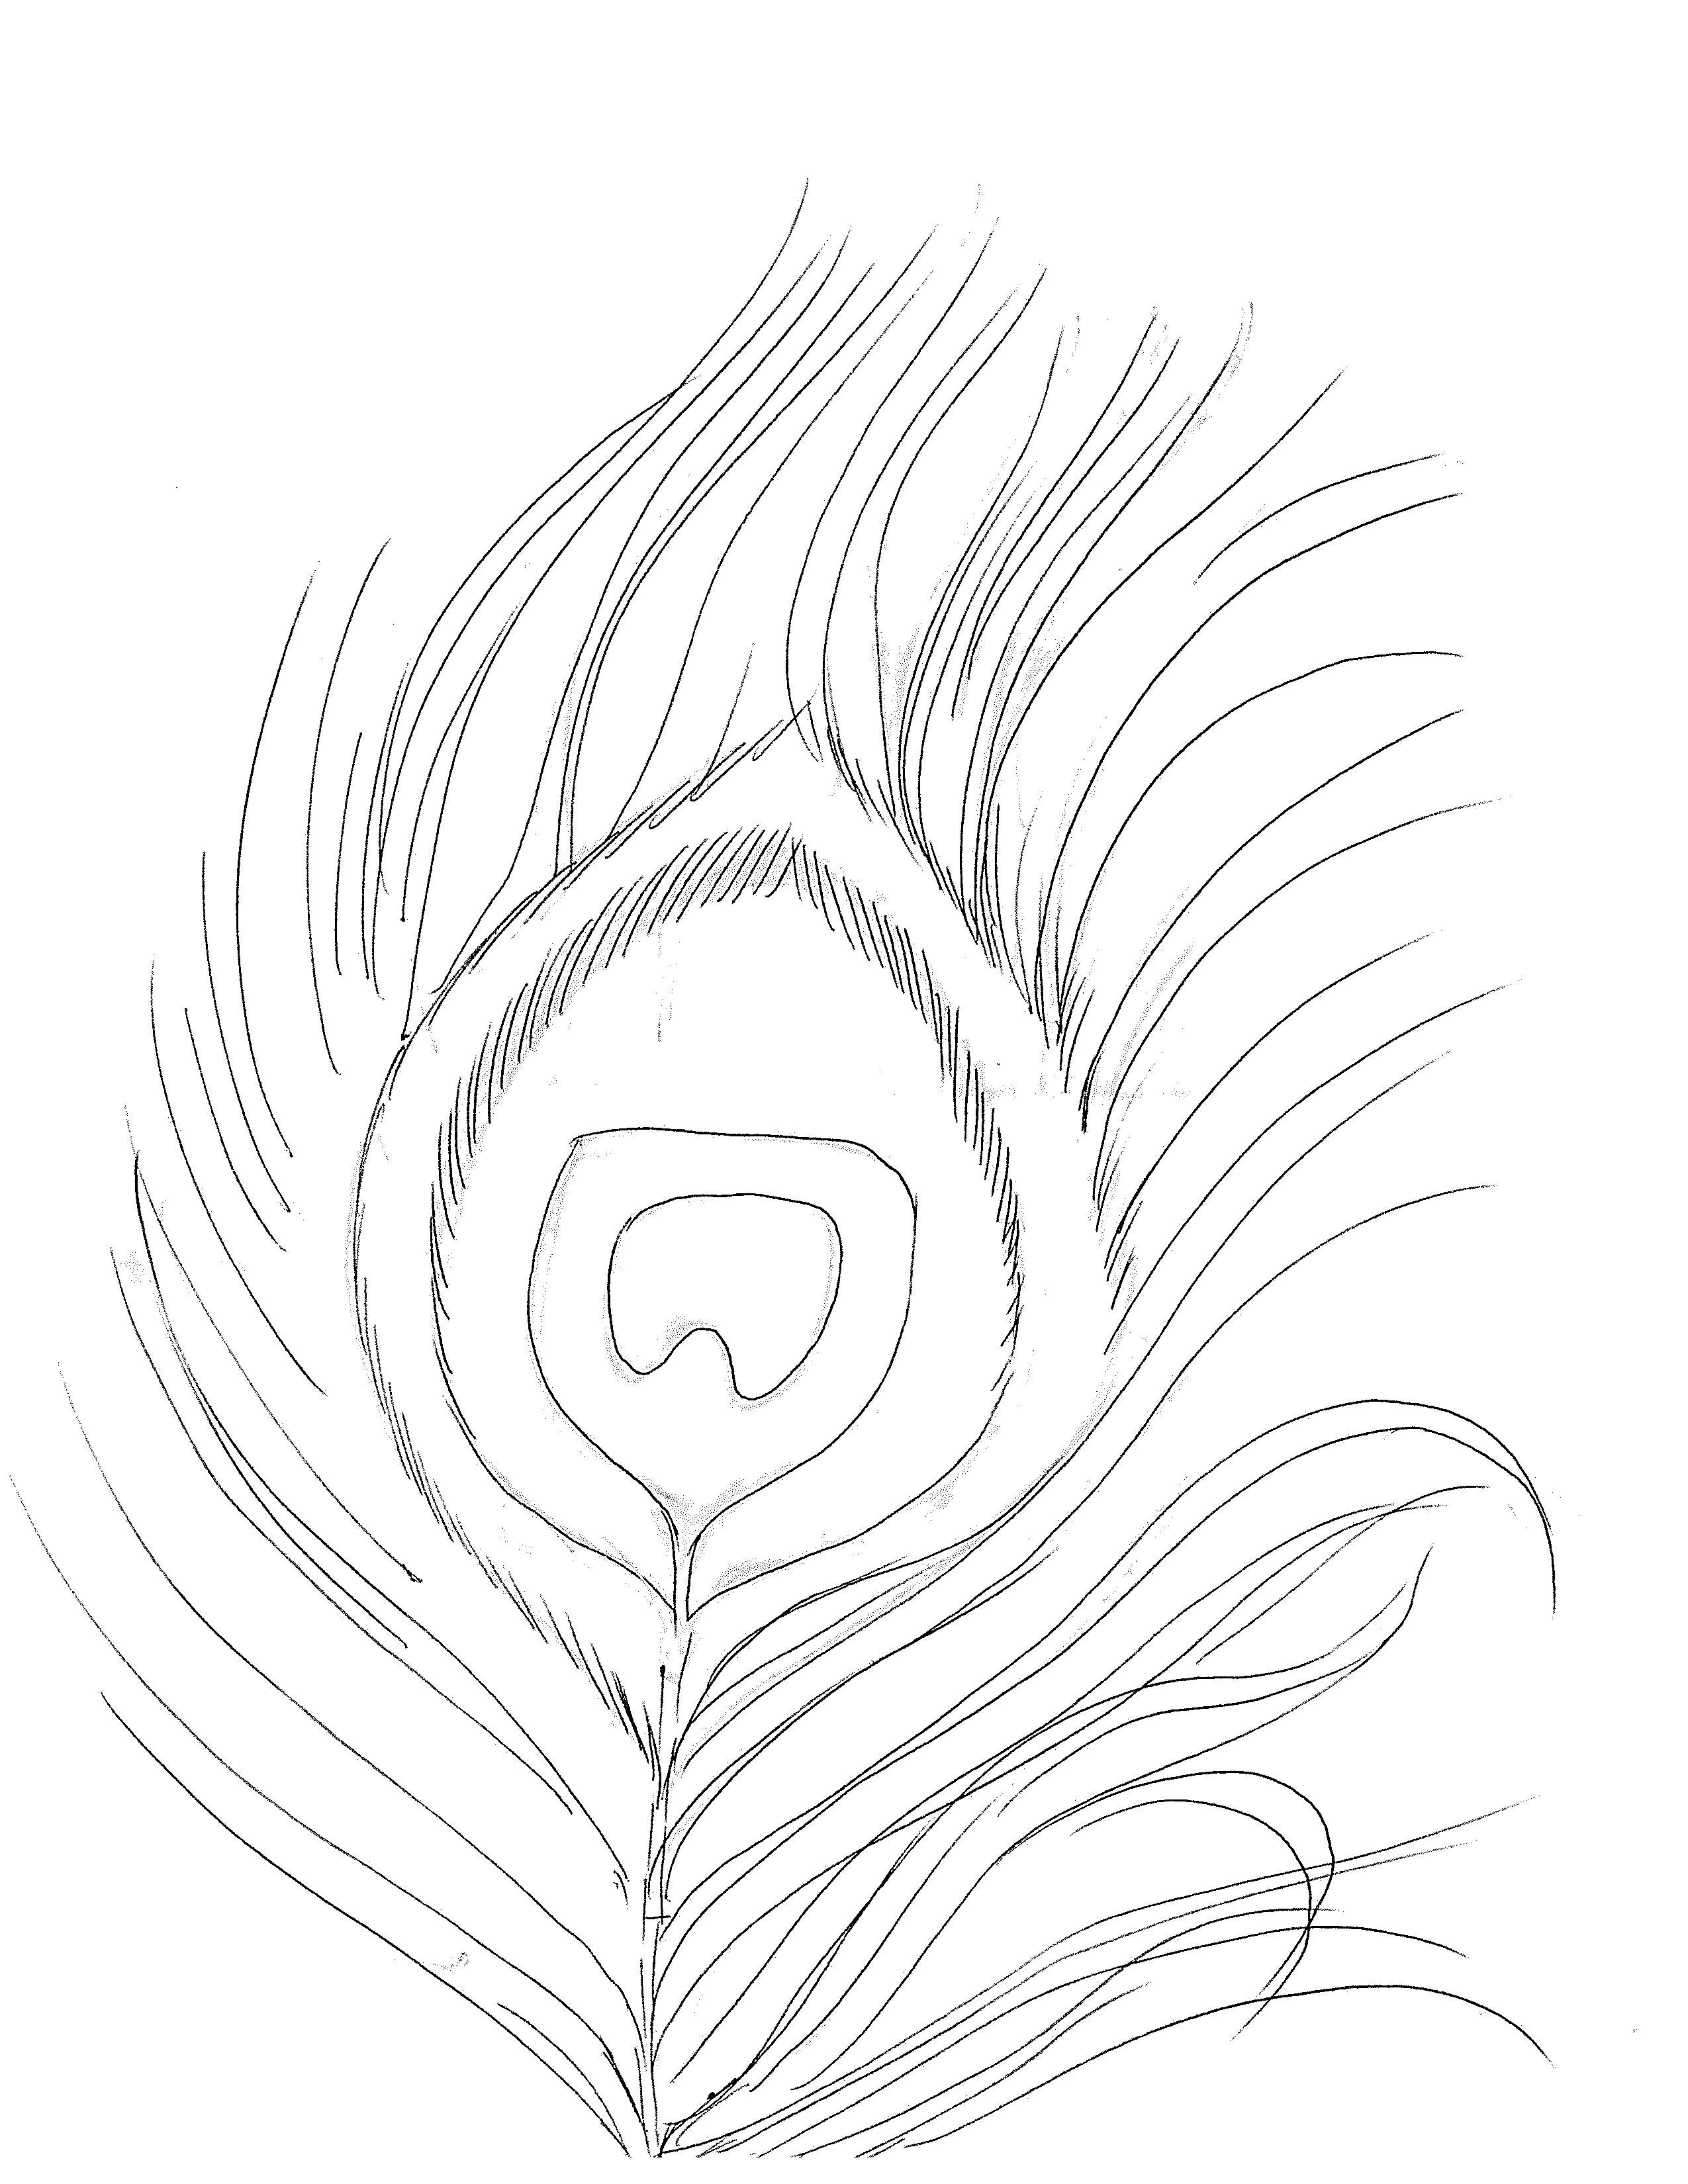 Peacock Feather Drawing